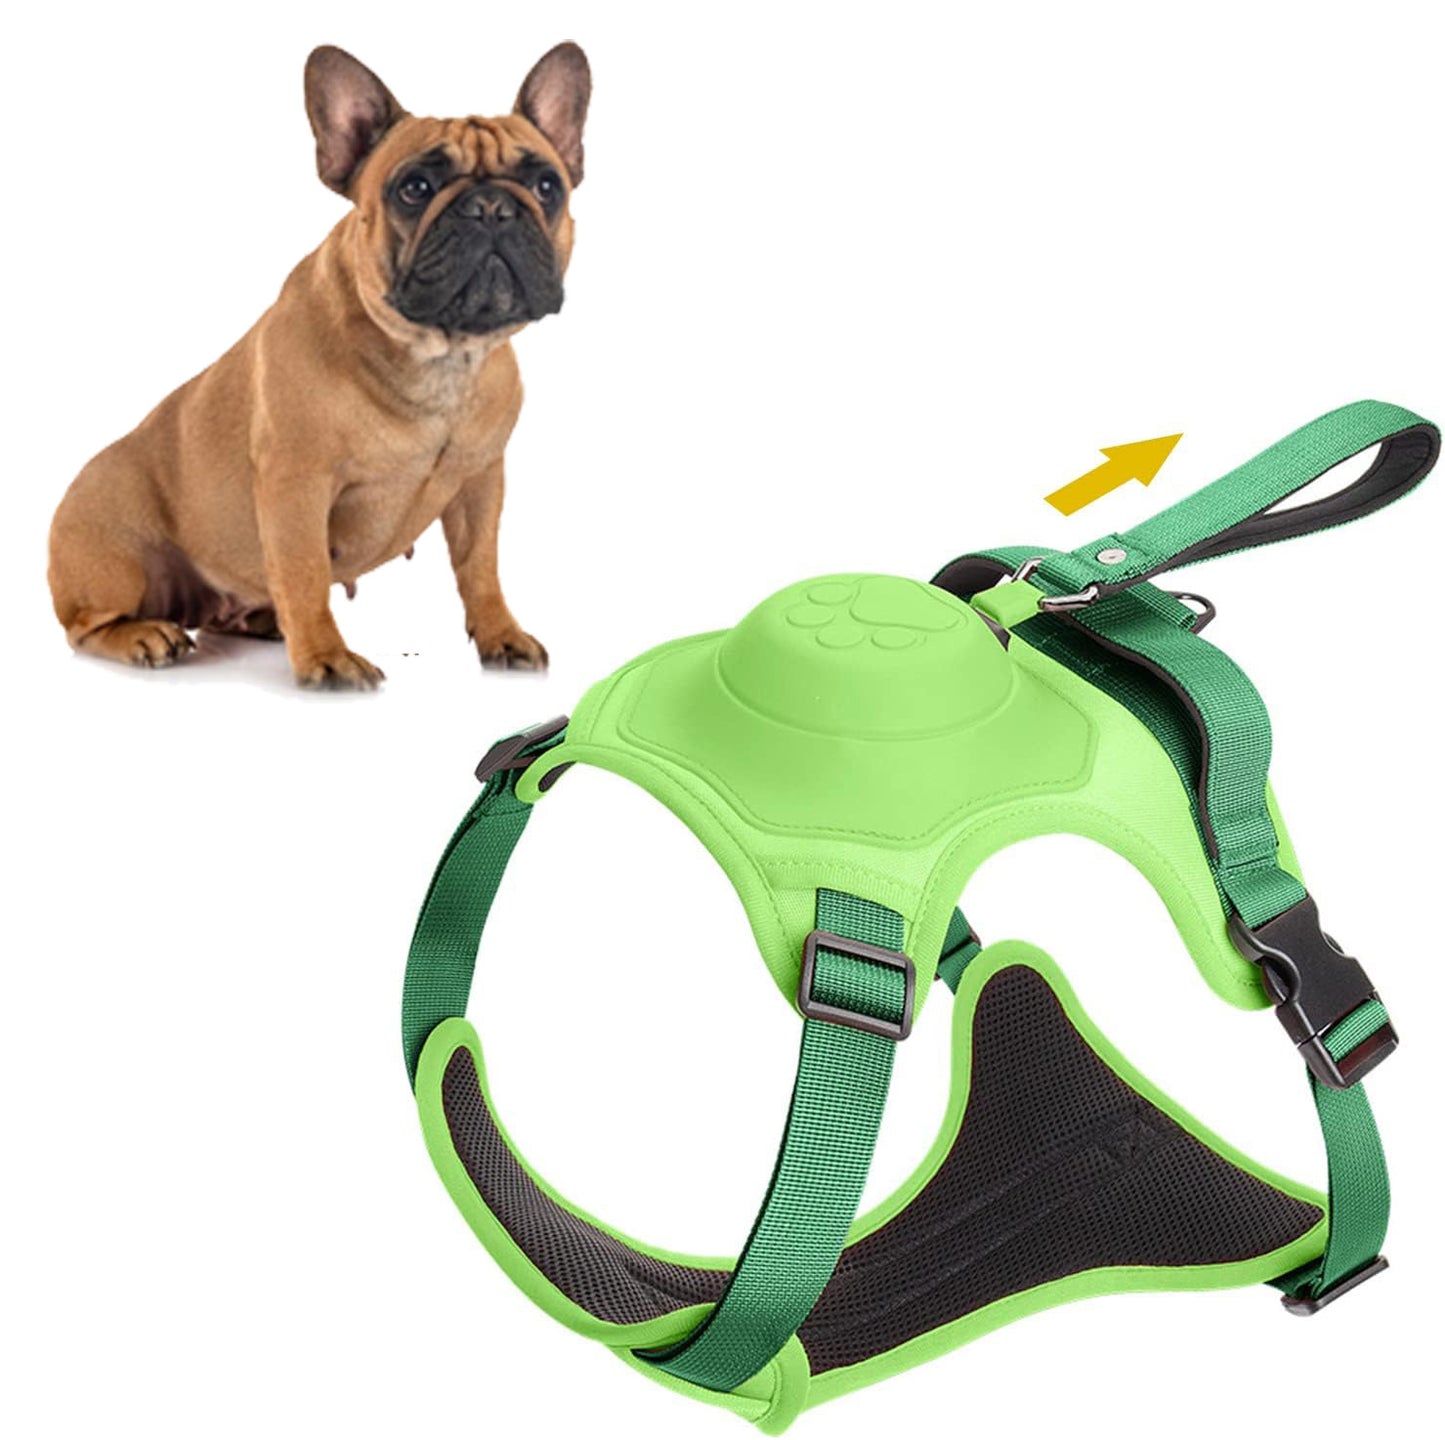 BulldogBound-Frenchie-Harness-and-Retractable-Leash-Set-All-in-One-www.frenchie.shop